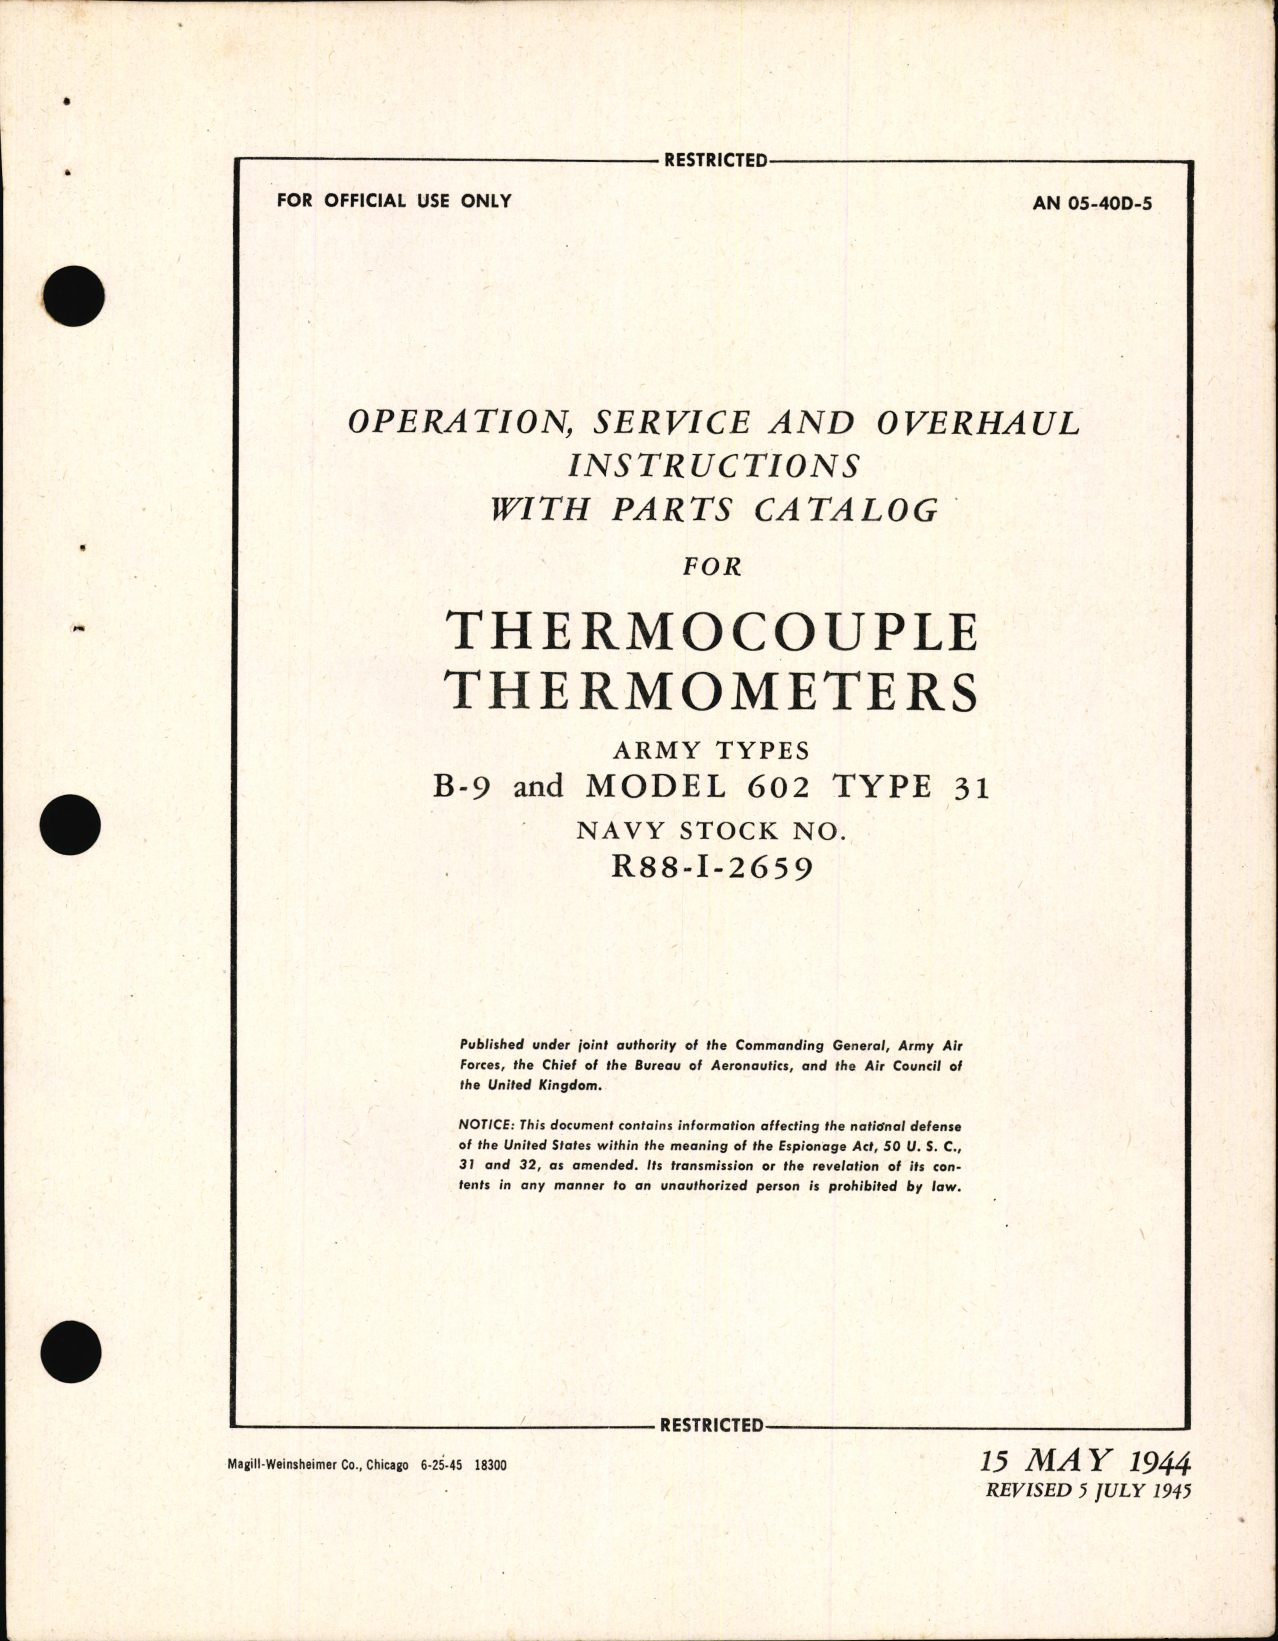 Sample page 3 from AirCorps Library document: Operation, Service, & Overhaul Instructions with Parts Catalog for Thermocouple Thermometers